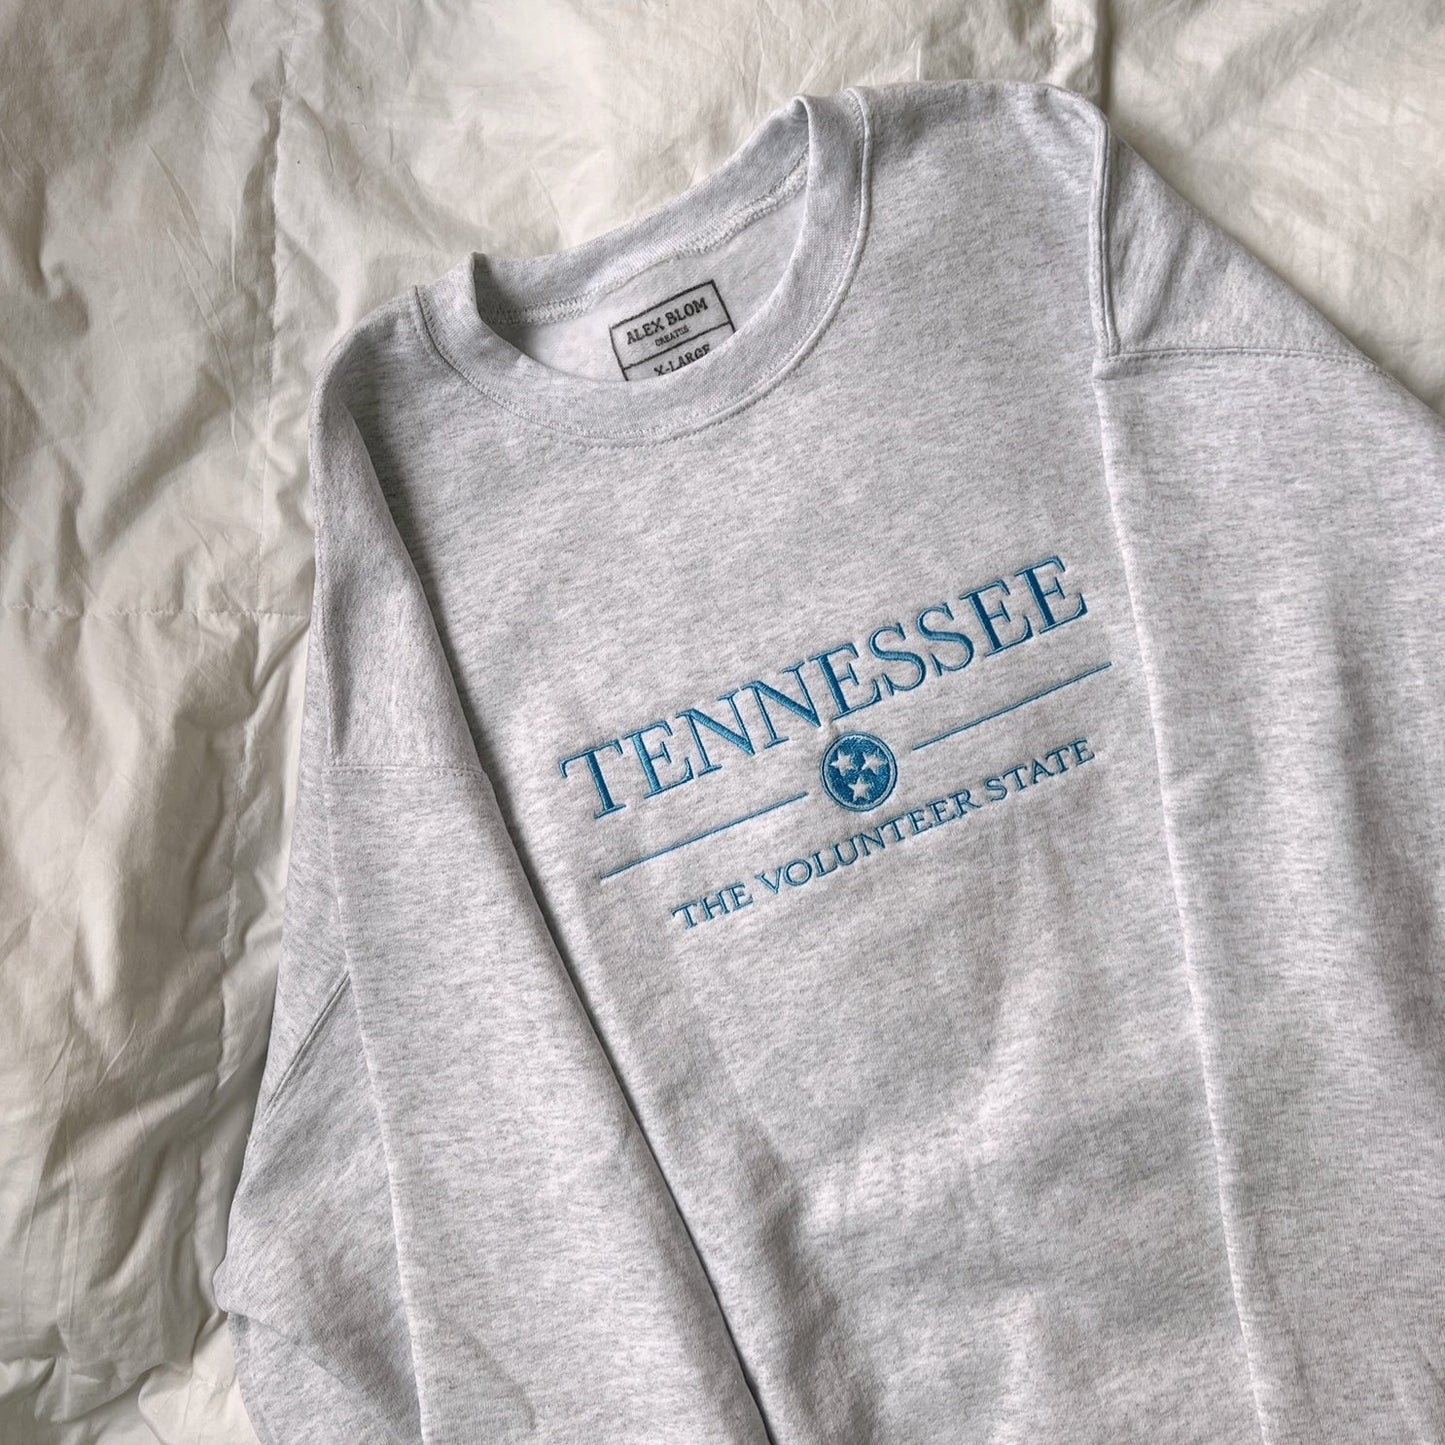 Tennessee Embroidered Crewneck